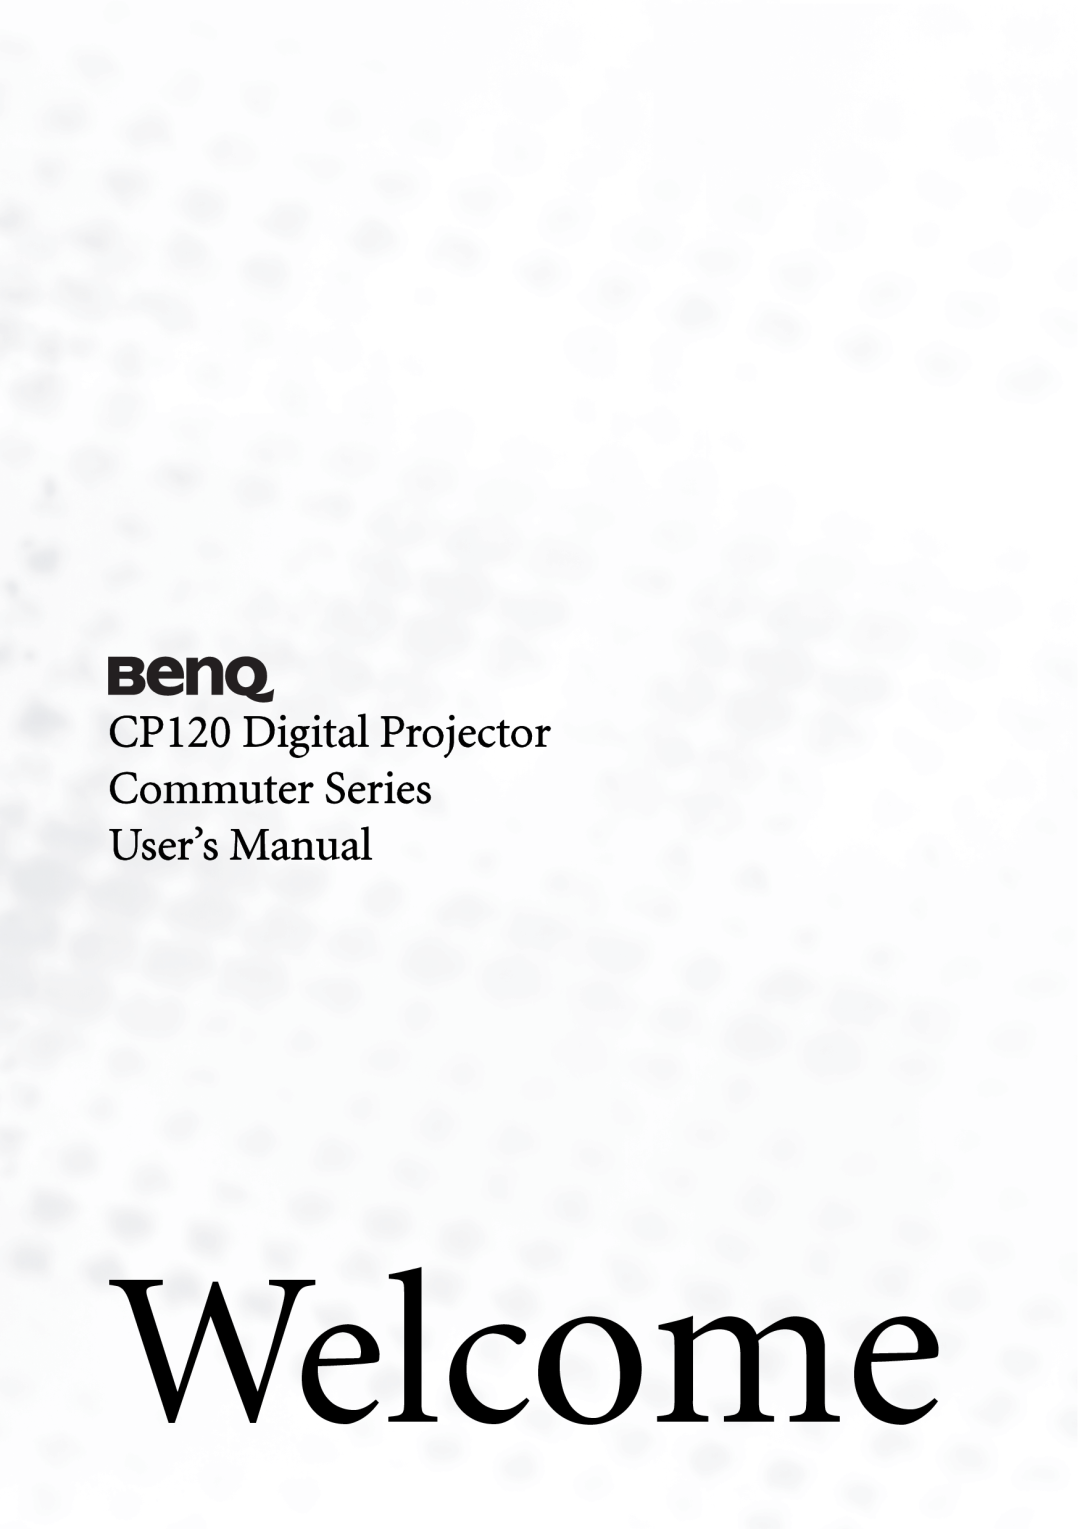 BenQ manual Welcome, CP120 Digital Projector Commuter Series User’s Manual 